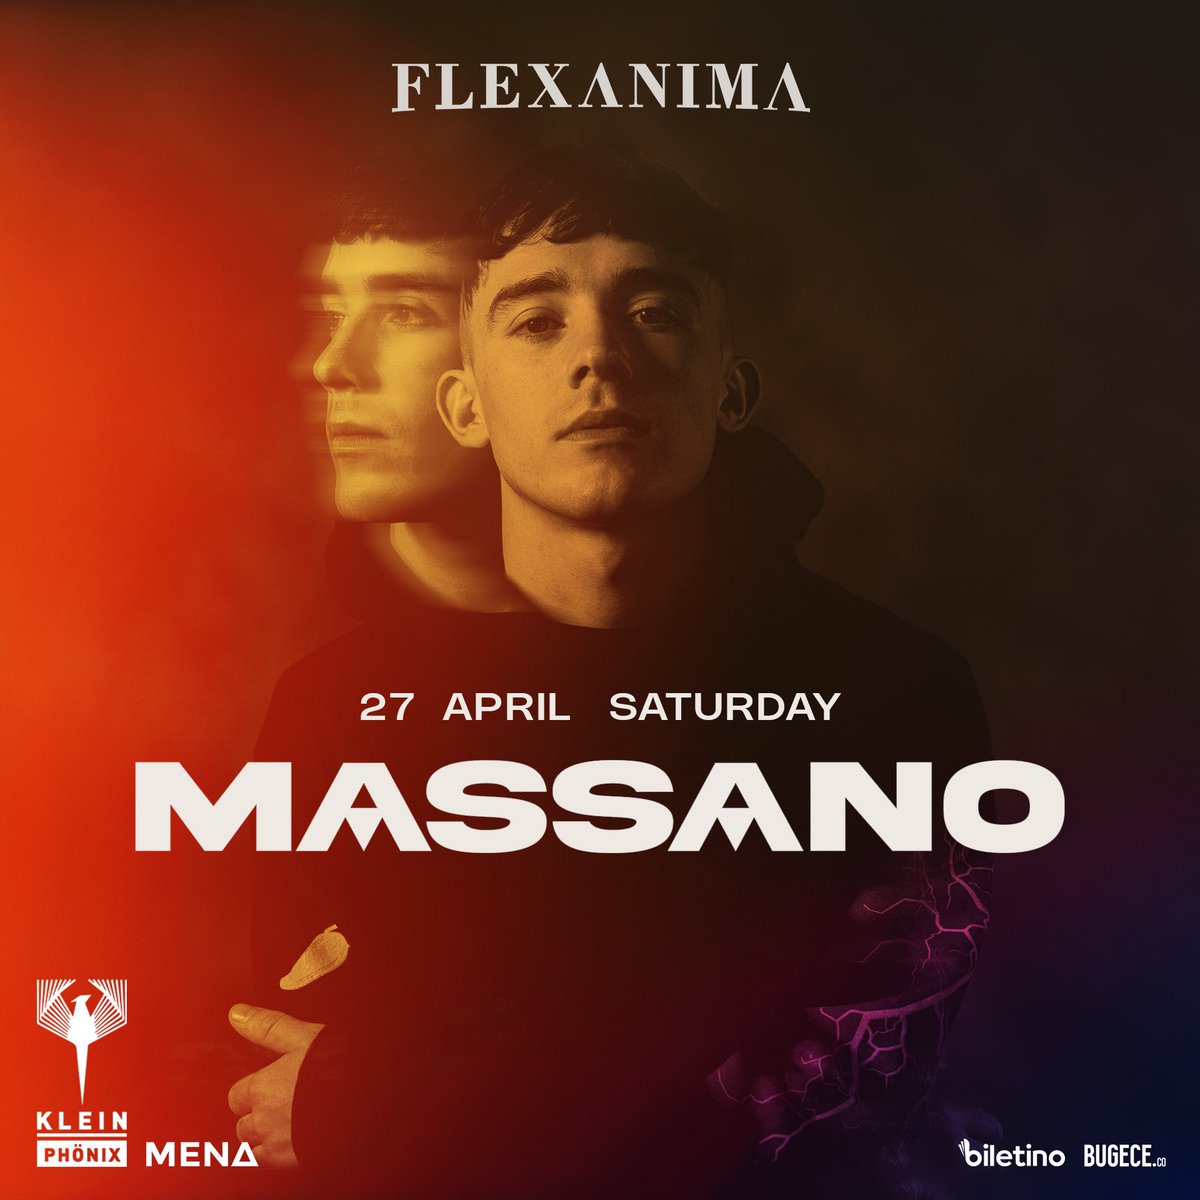 Get ready to welcome Massano once again, the artist who has left a global impact with his music and performances!

Stay tuned; tickets will be on sale this Wednesday at 2 PM.

#Flexanima #FlexanimaMusic #Massano #KleinPhönix